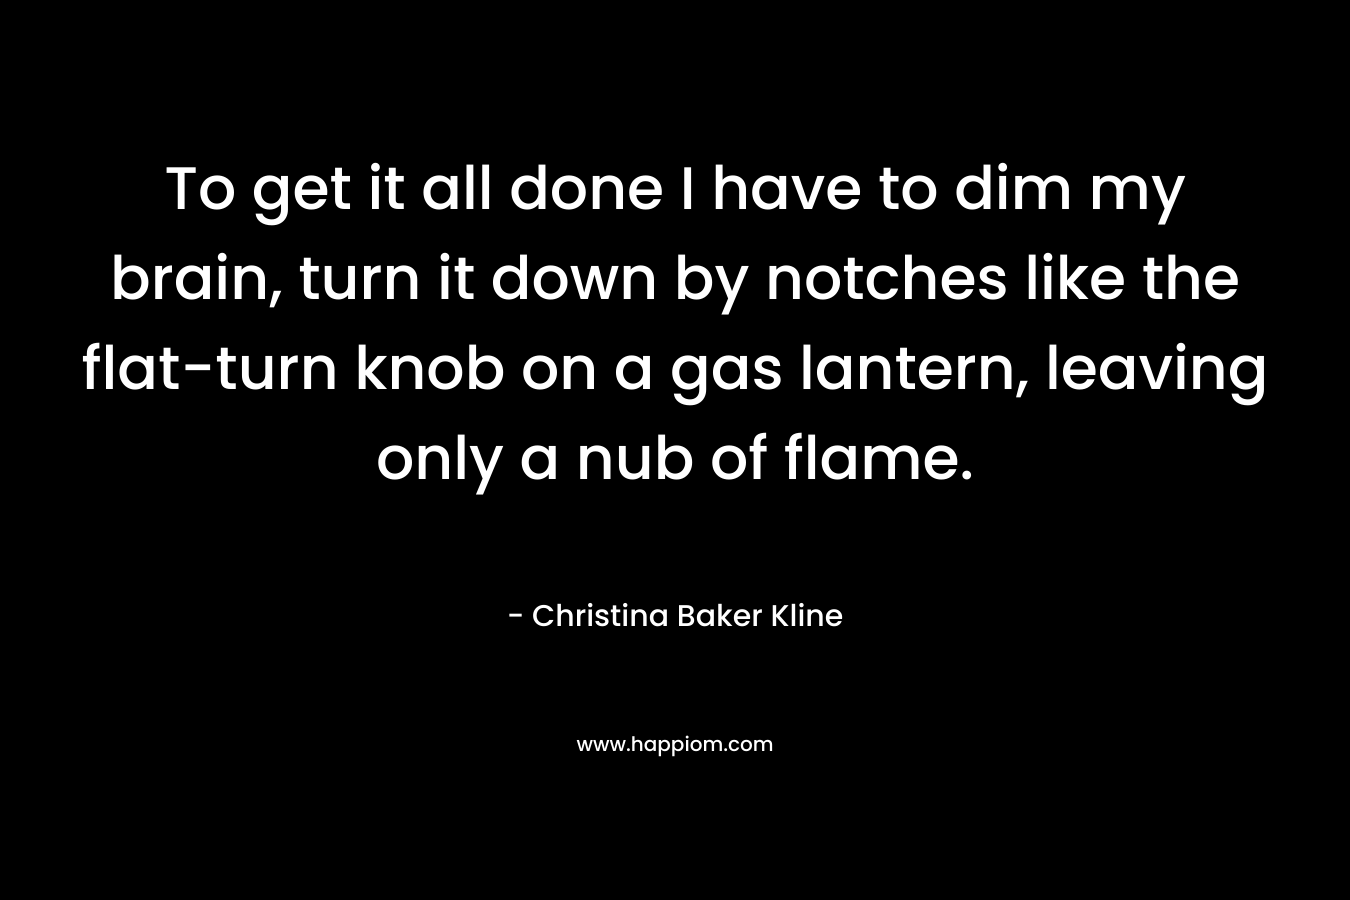 To get it all done I have to dim my brain, turn it down by notches like the flat-turn knob on a gas lantern, leaving only a nub of flame.